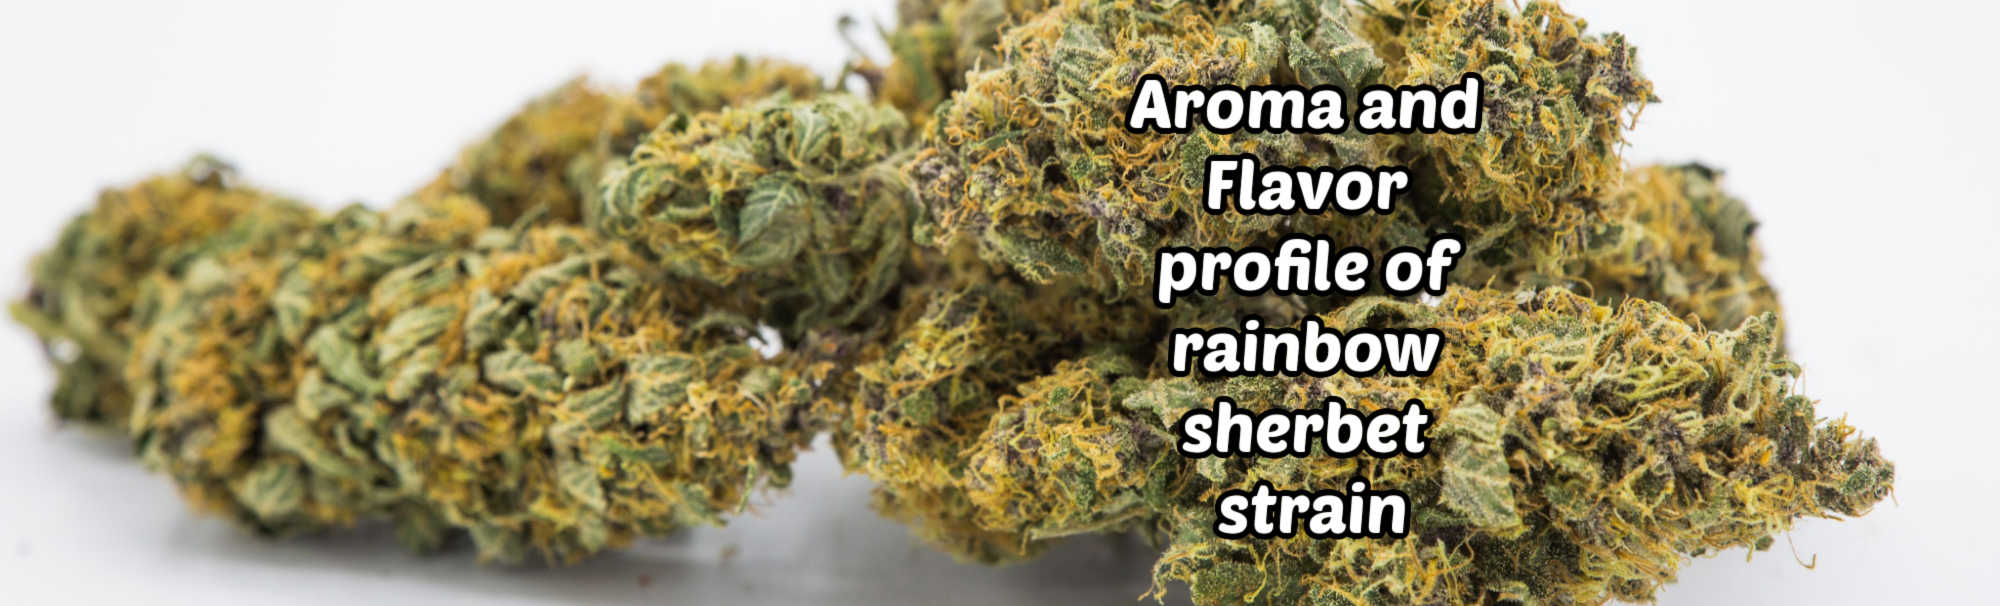 image of rainbow sherbet aroma and flavor profile